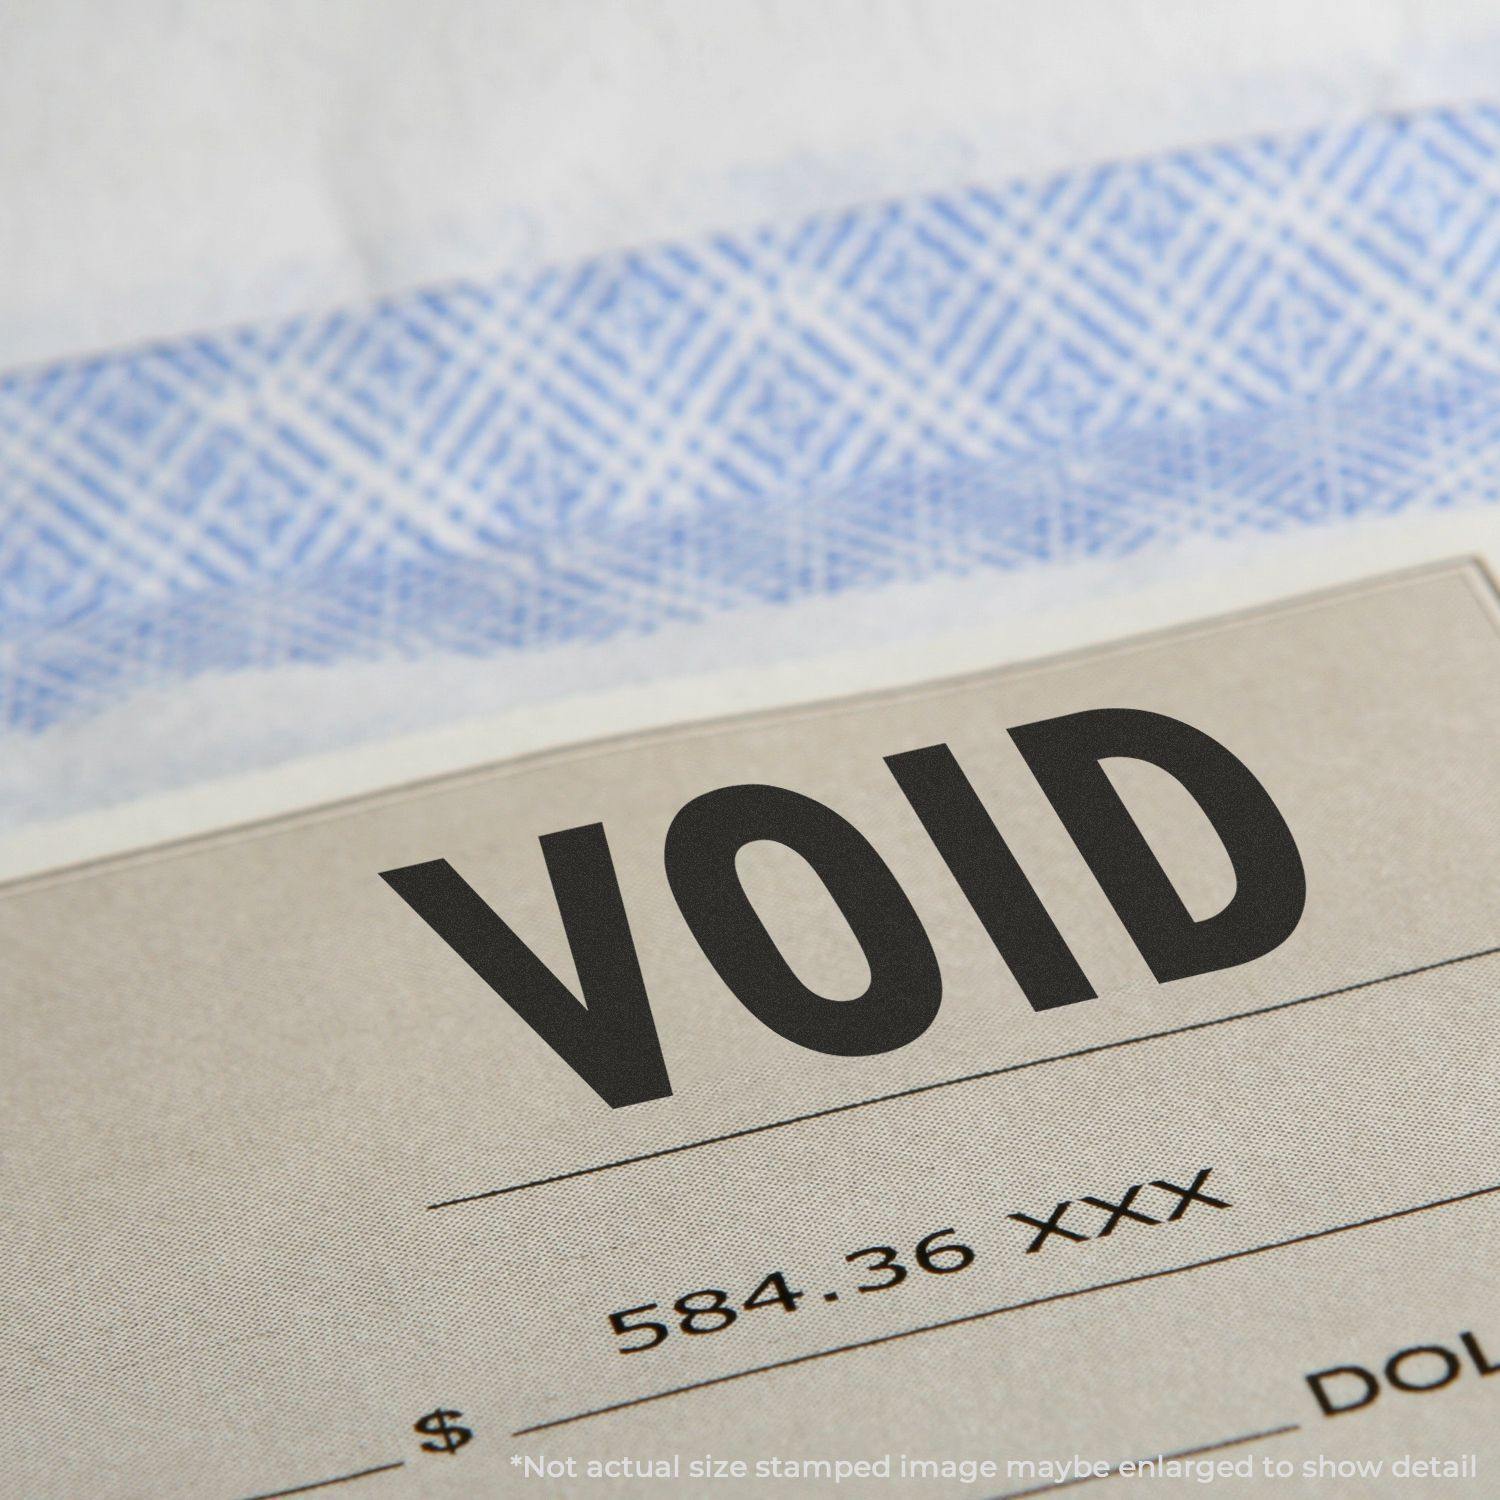 A stock office rubber stamp with a stamped image showing how the text "VOID" is displayed after stamping.